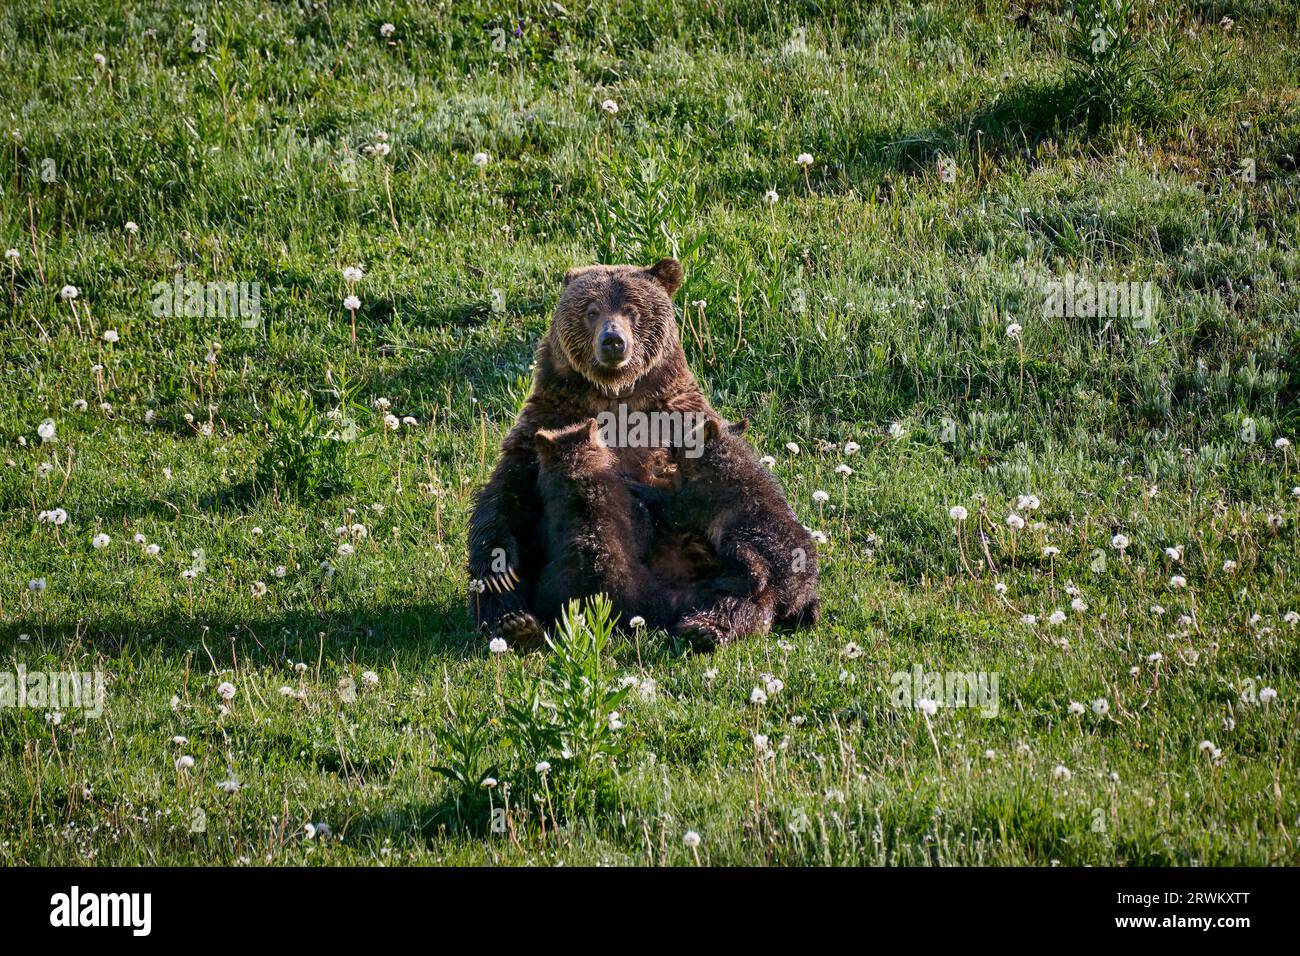 Grizzly bear sow nursing her cubs, Ursus arctos horribilis, Yellowstone National Park, Wyoming, United States of America Stock Photo